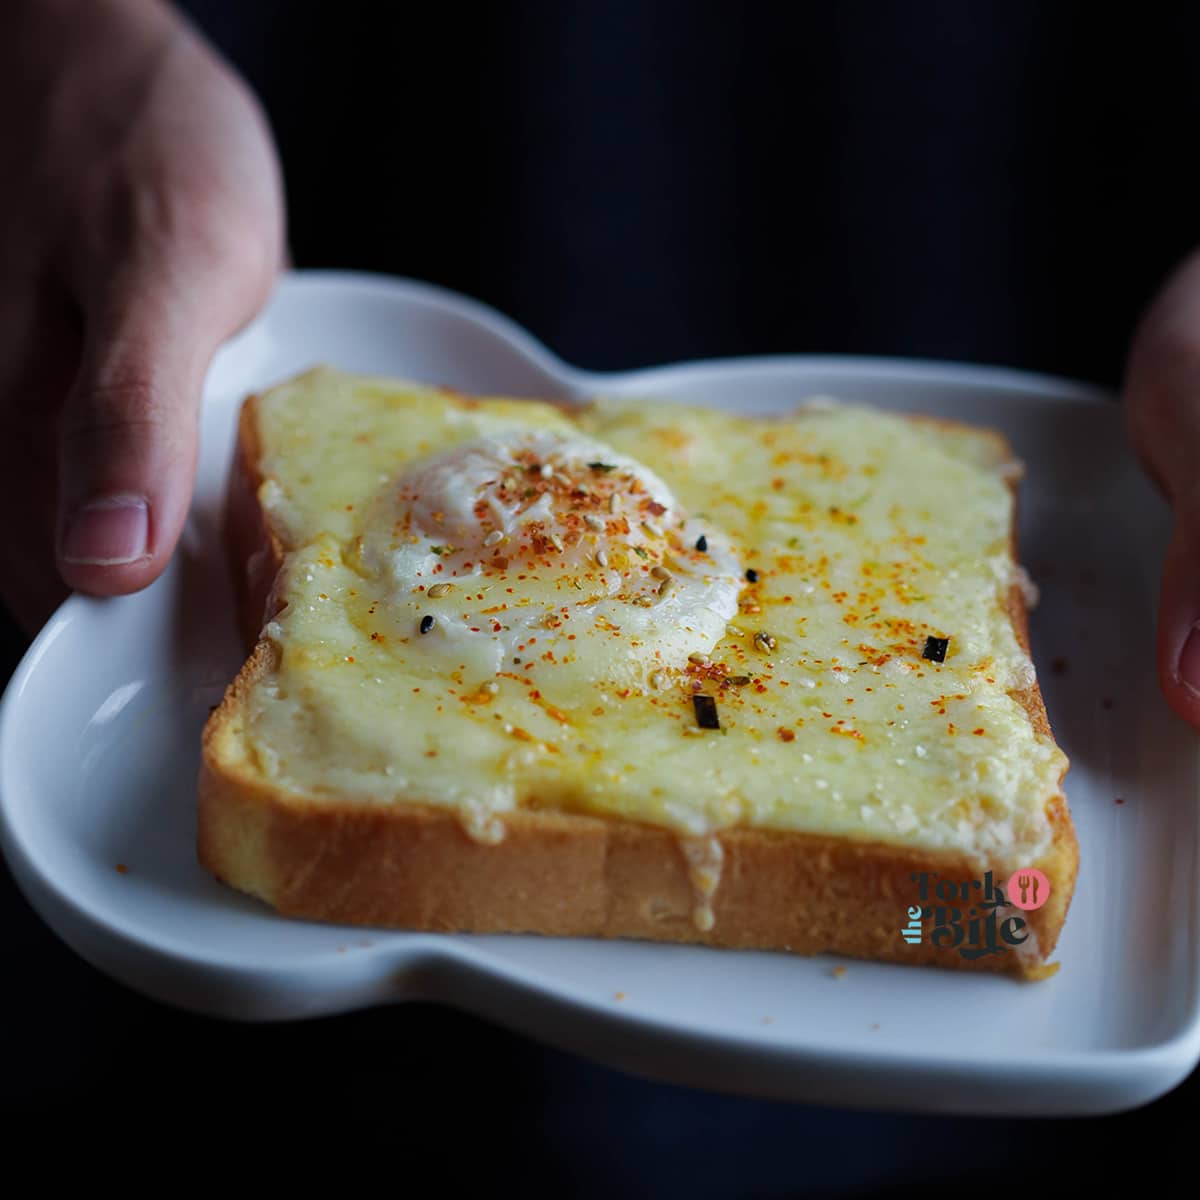 Get crispy, golden eggs in a basket in minutes with our easy air fryer recipe. Perfect for breakfast or a quick snack, this dish is a healthier alternative to traditional deep-frying methods